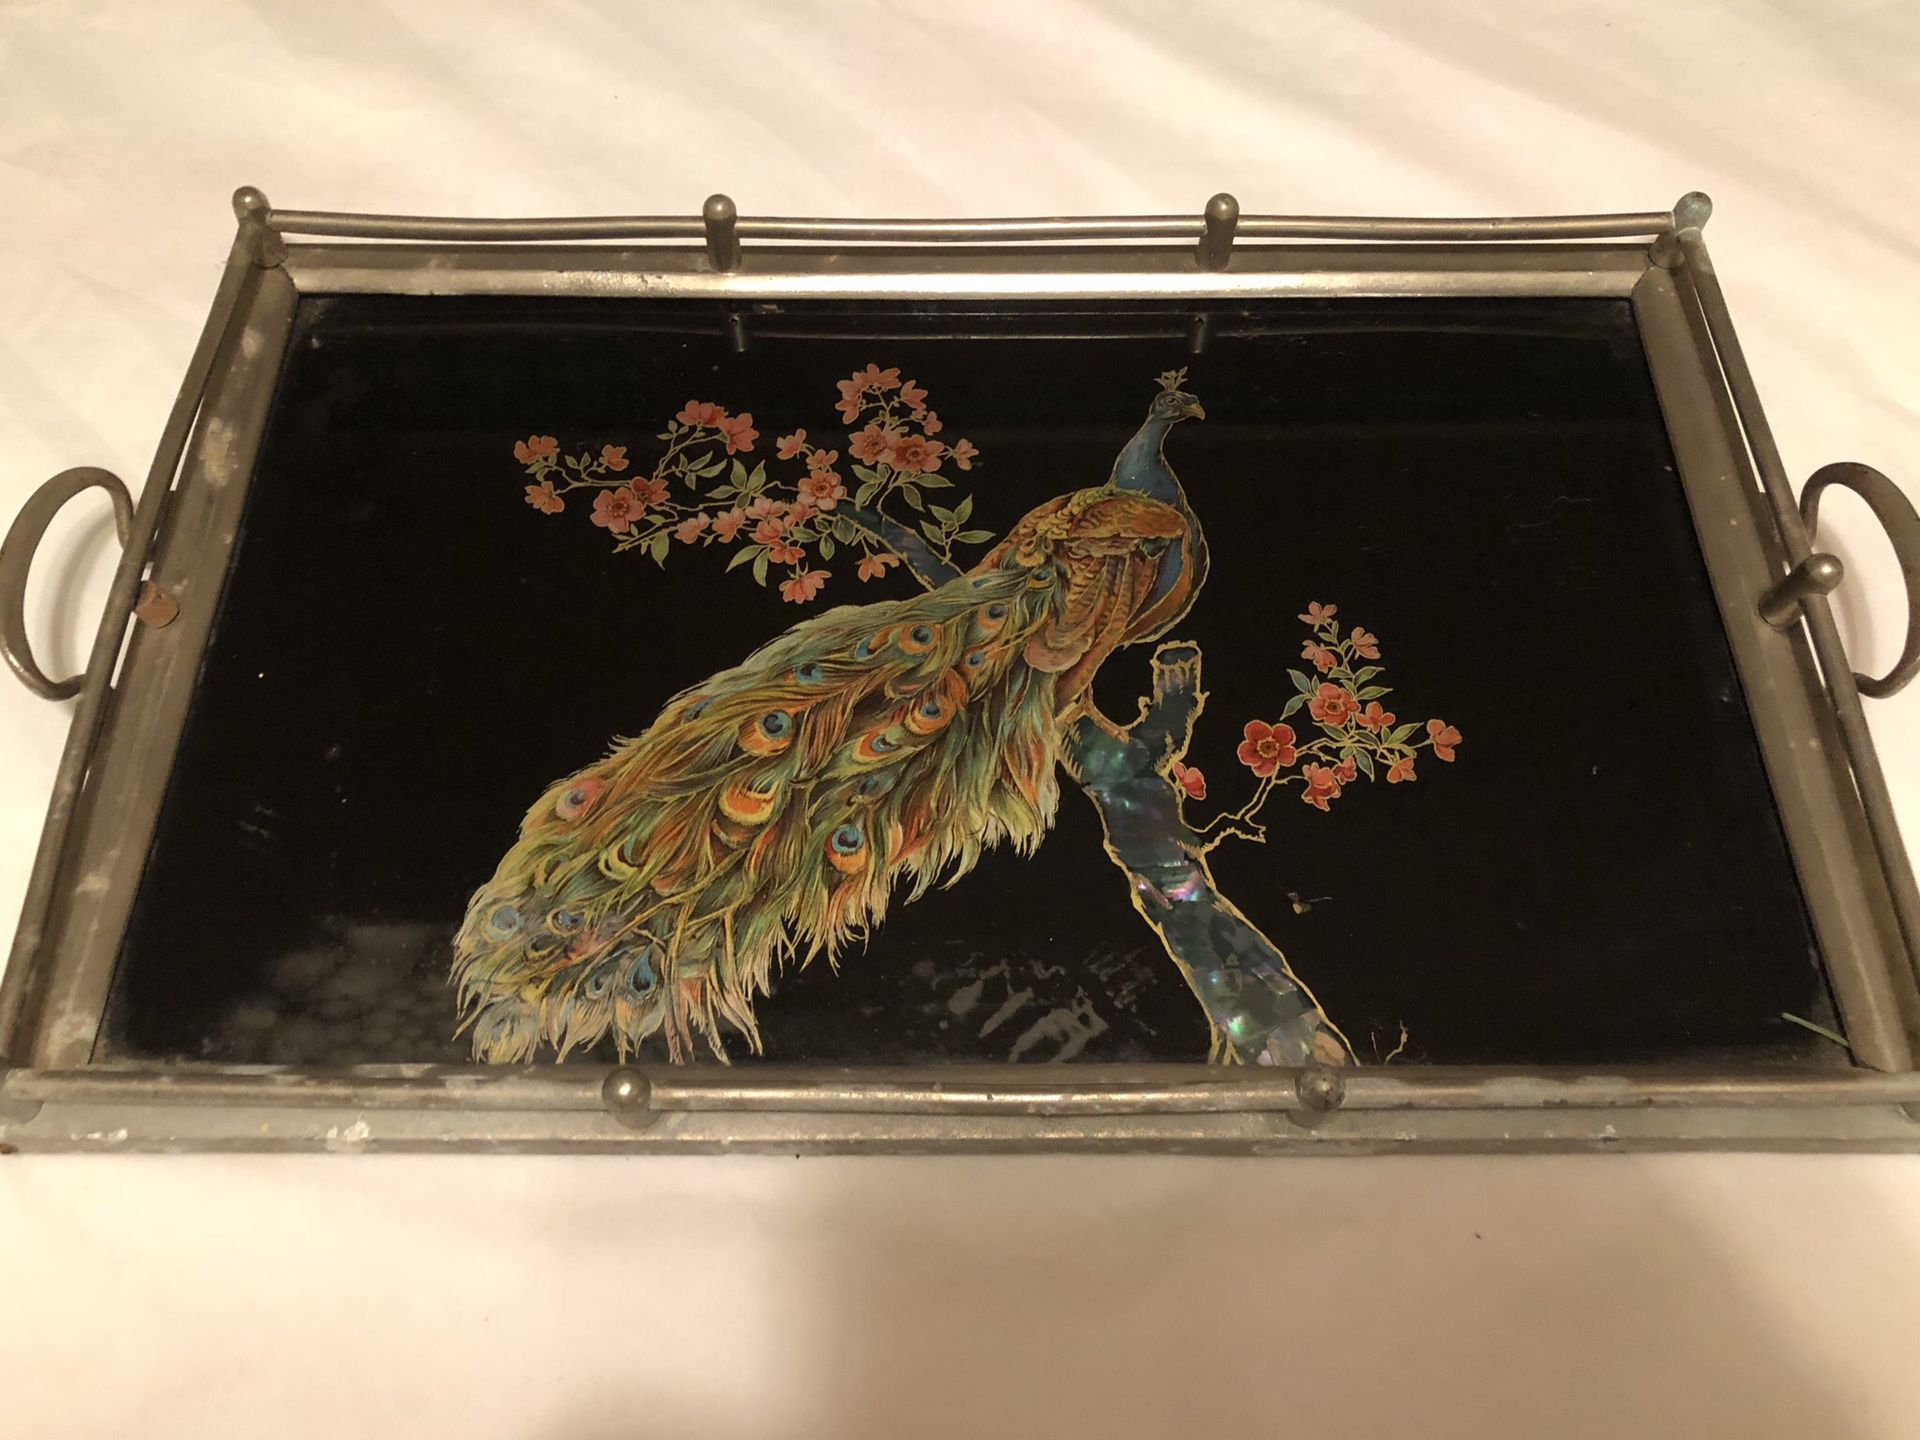 Antique Peacock Mirrored Tray